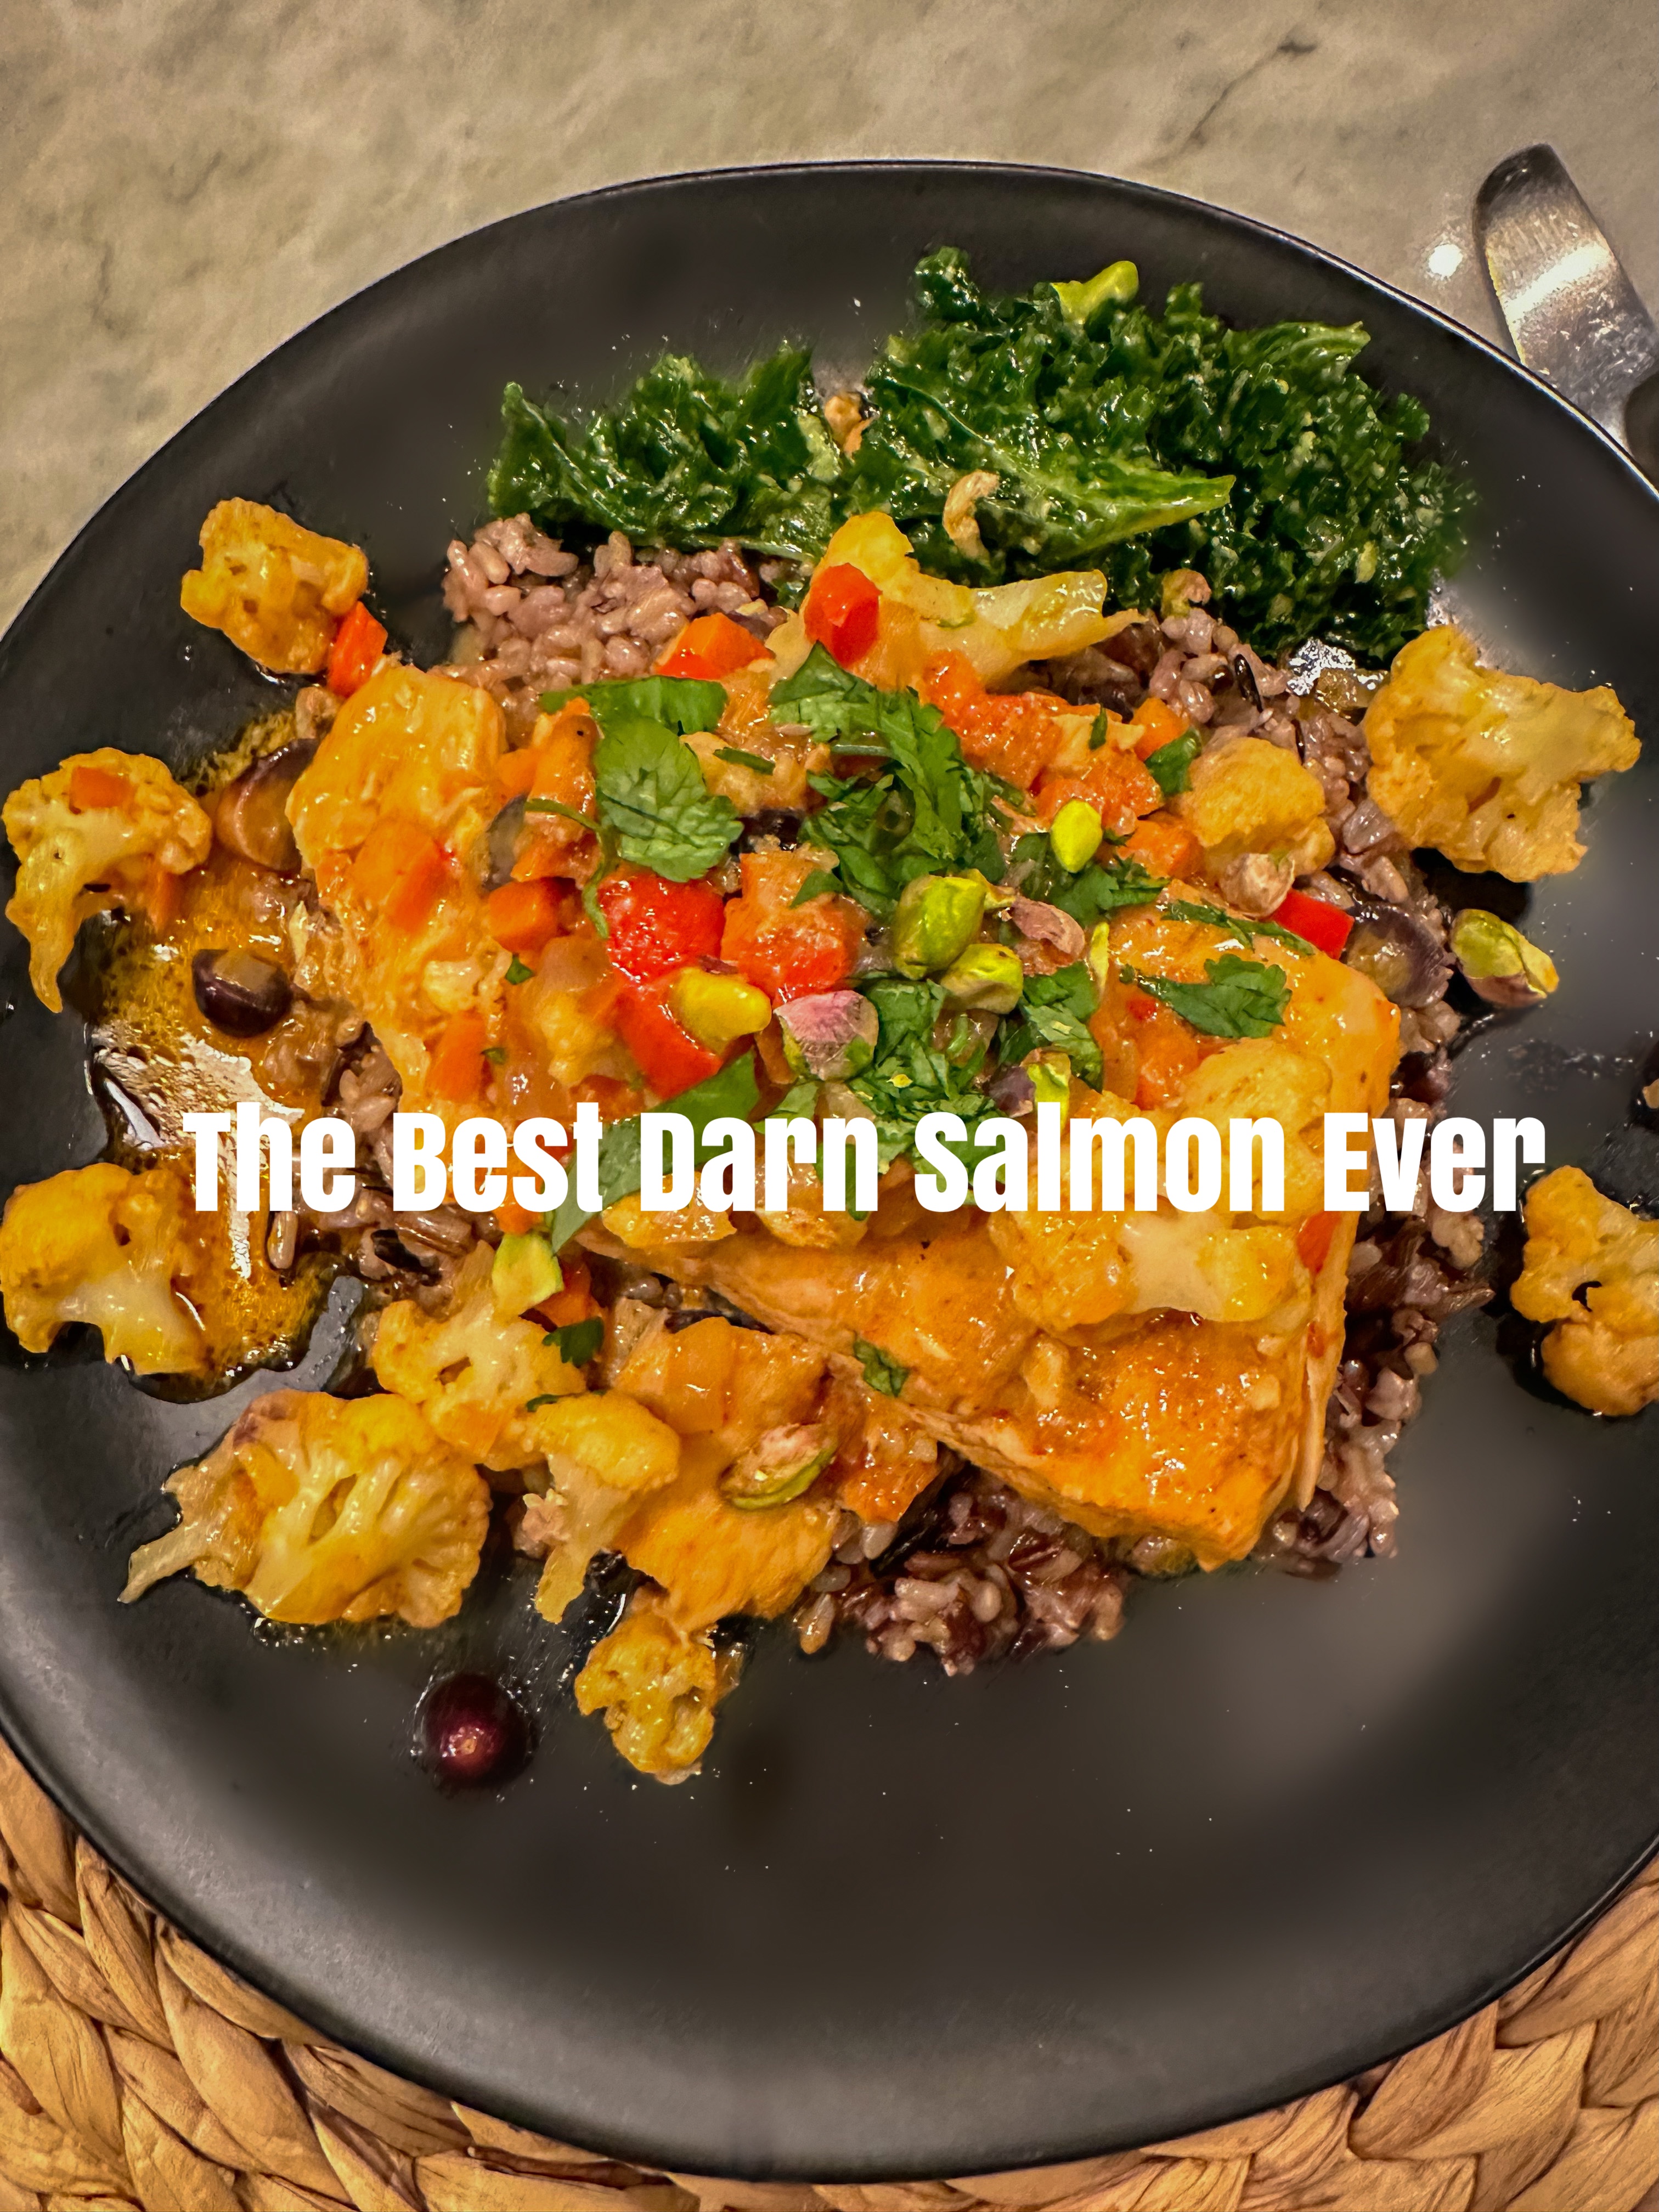 The Best Darn Salmon You’ve Ever Had